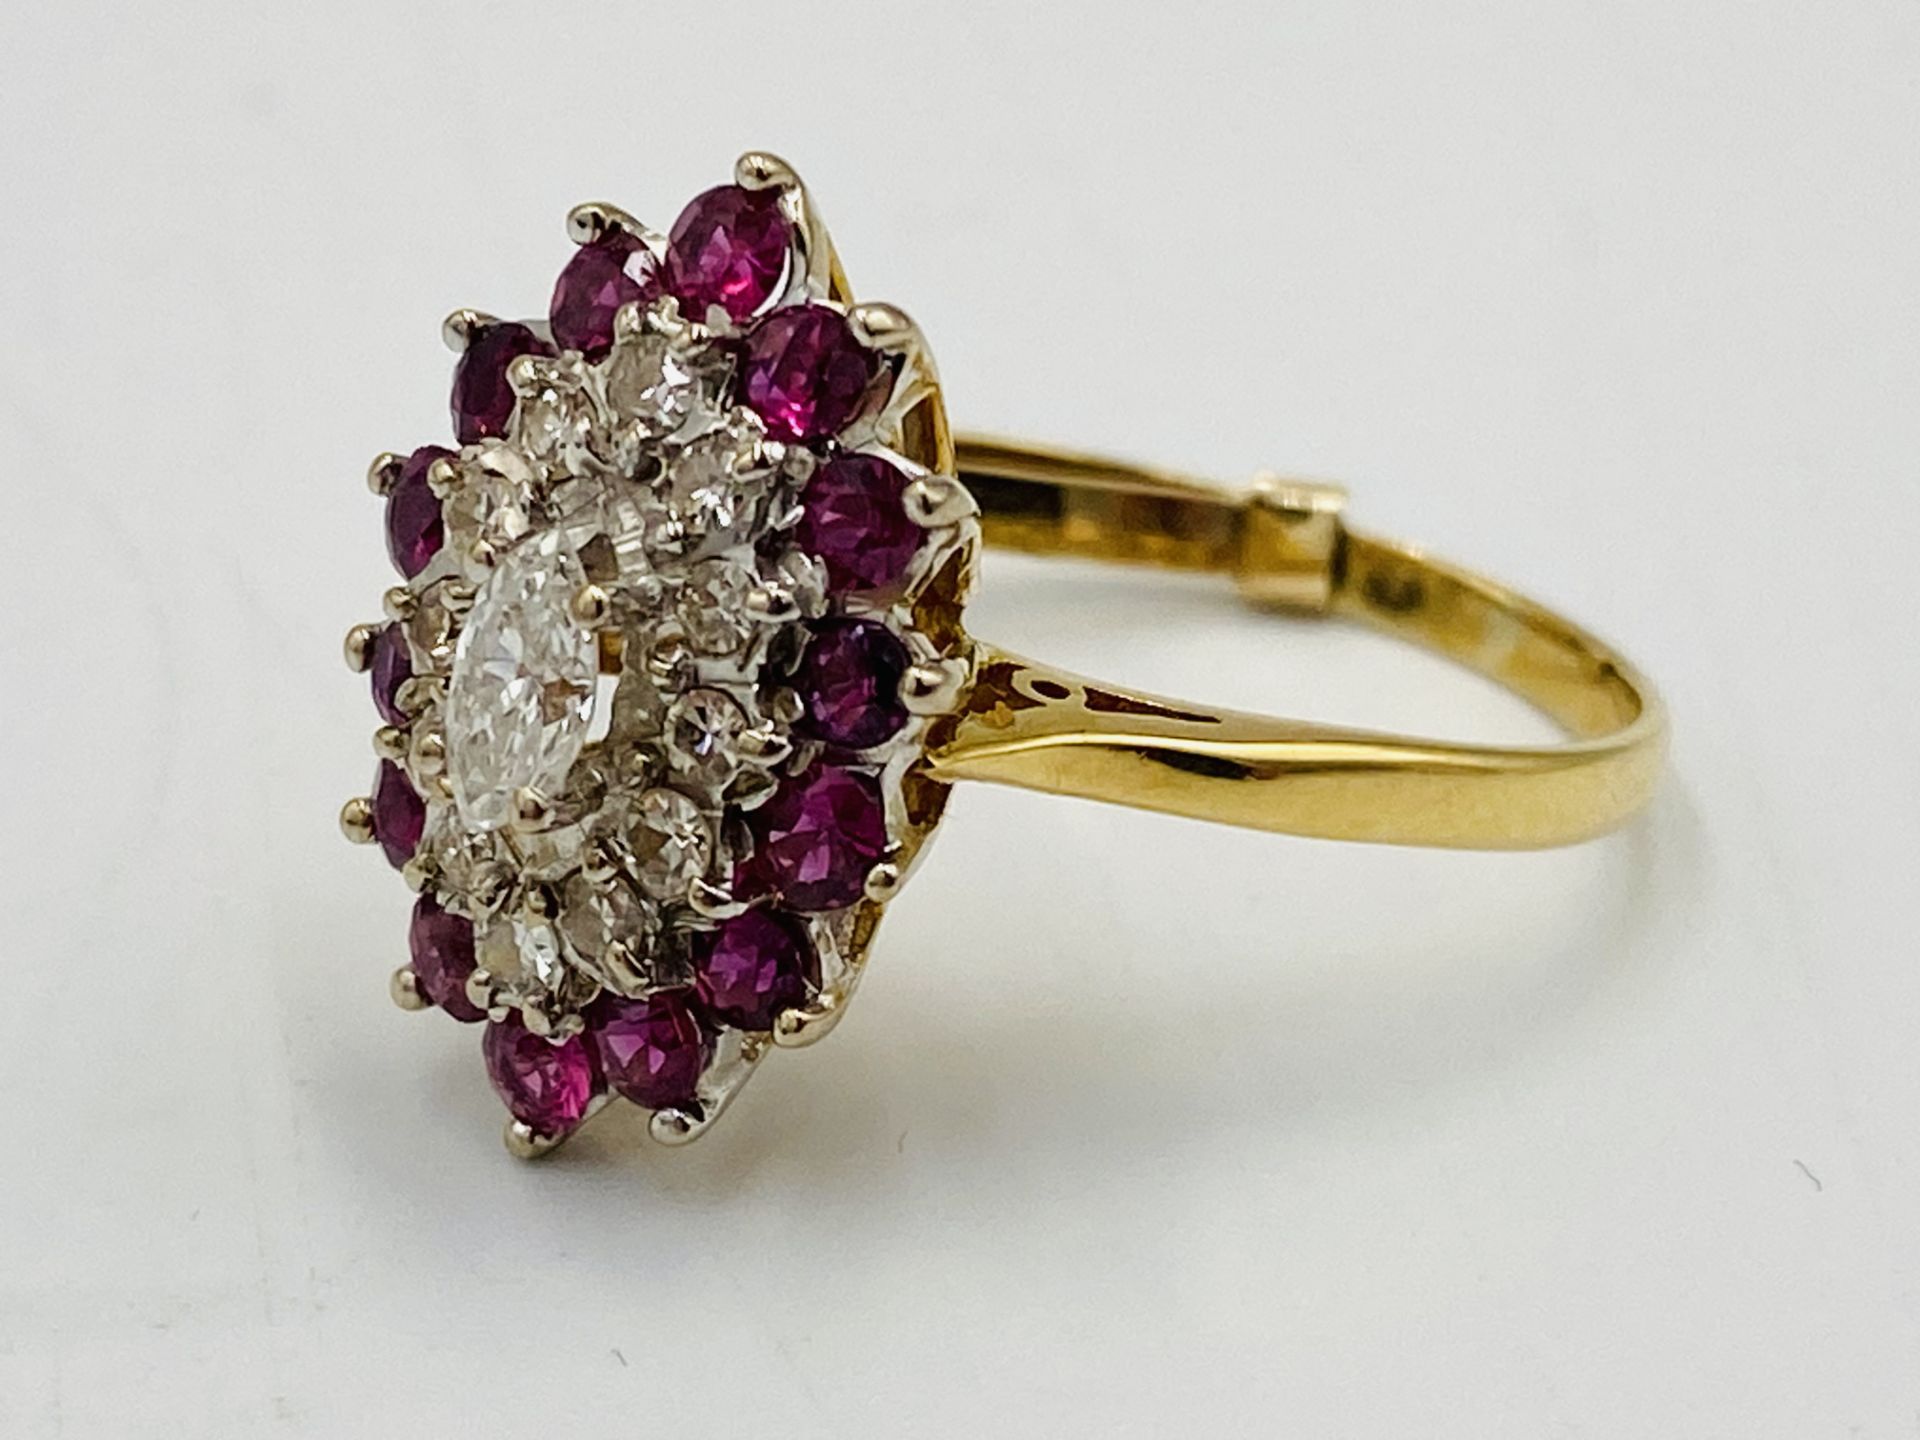 9ct gold ring set with diamonds and pink sapphires - Image 6 of 6